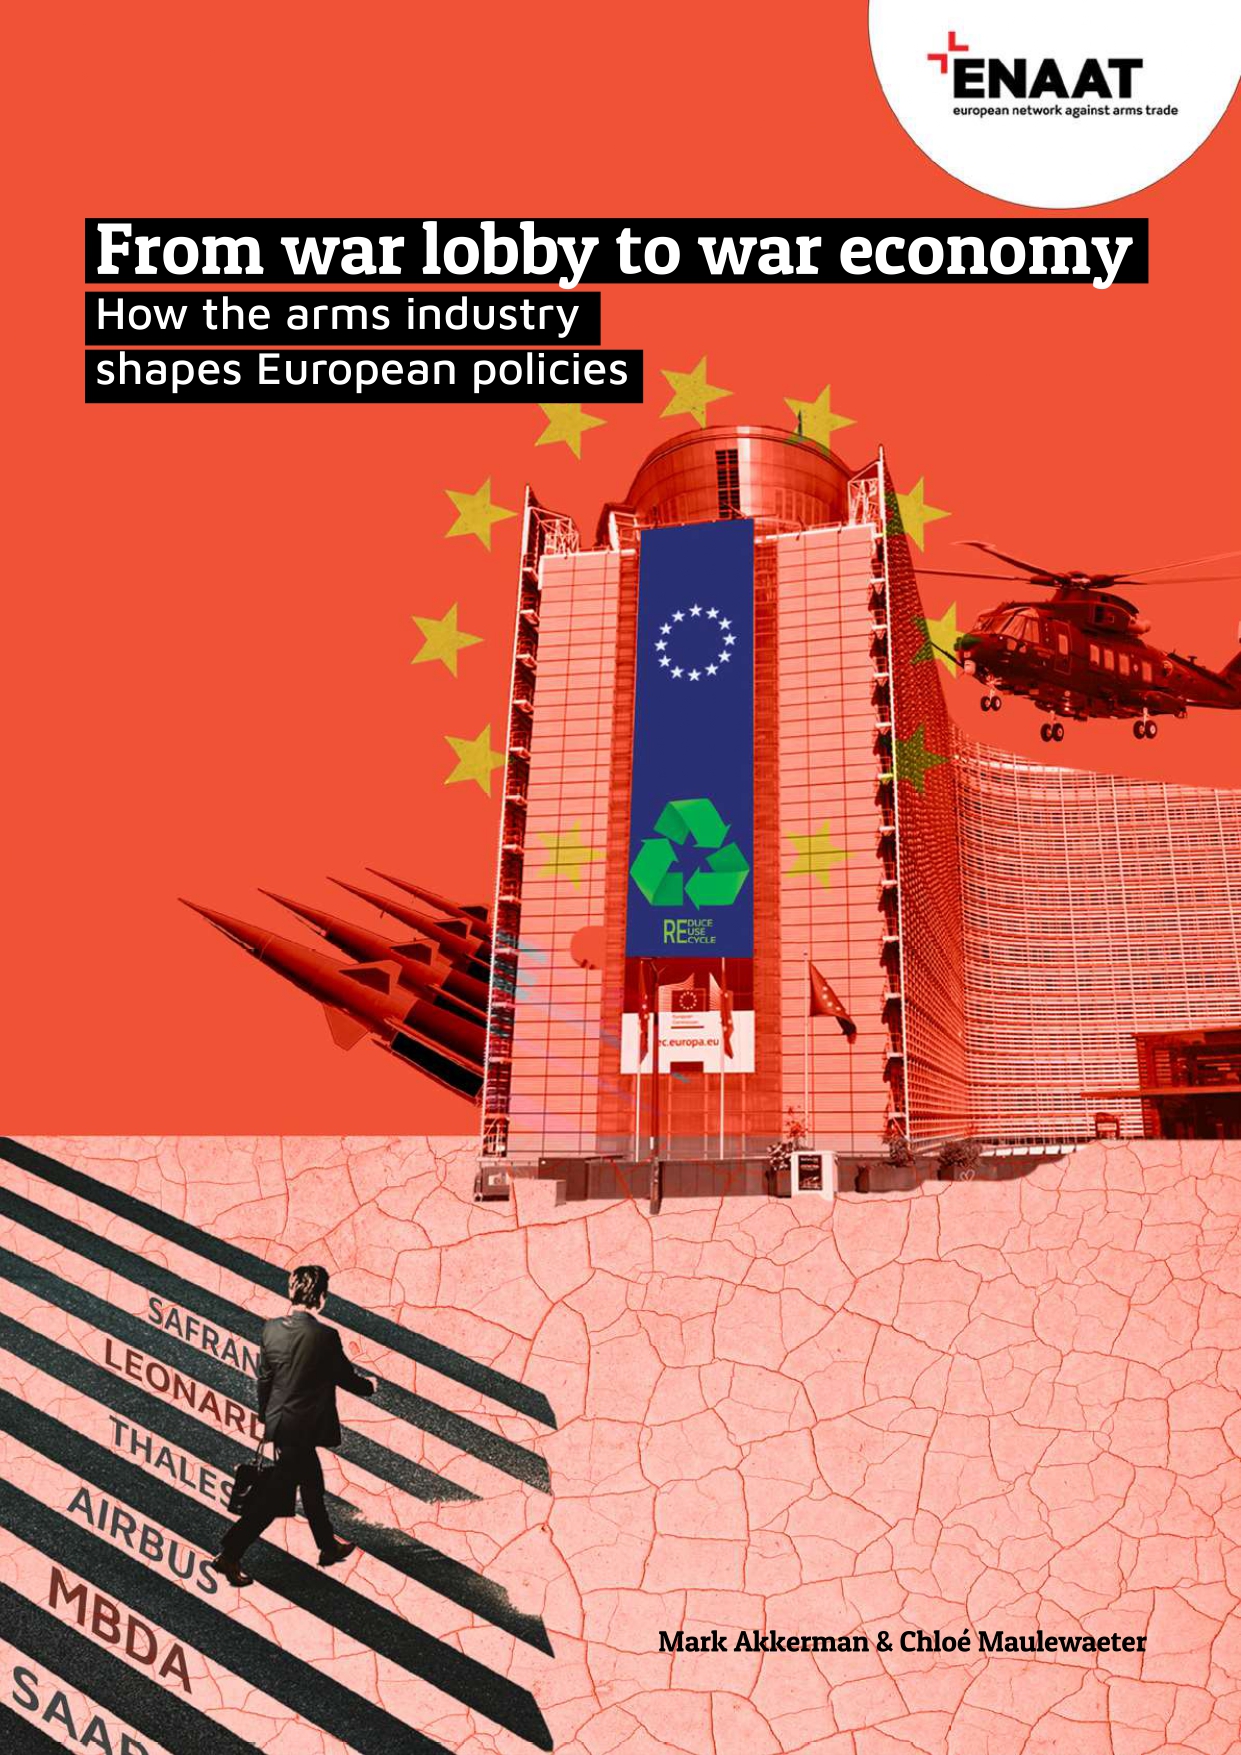 Report from ENAAT with Centre Delàs: “From war lobby to war economy. How the arms industry shapes European policies”